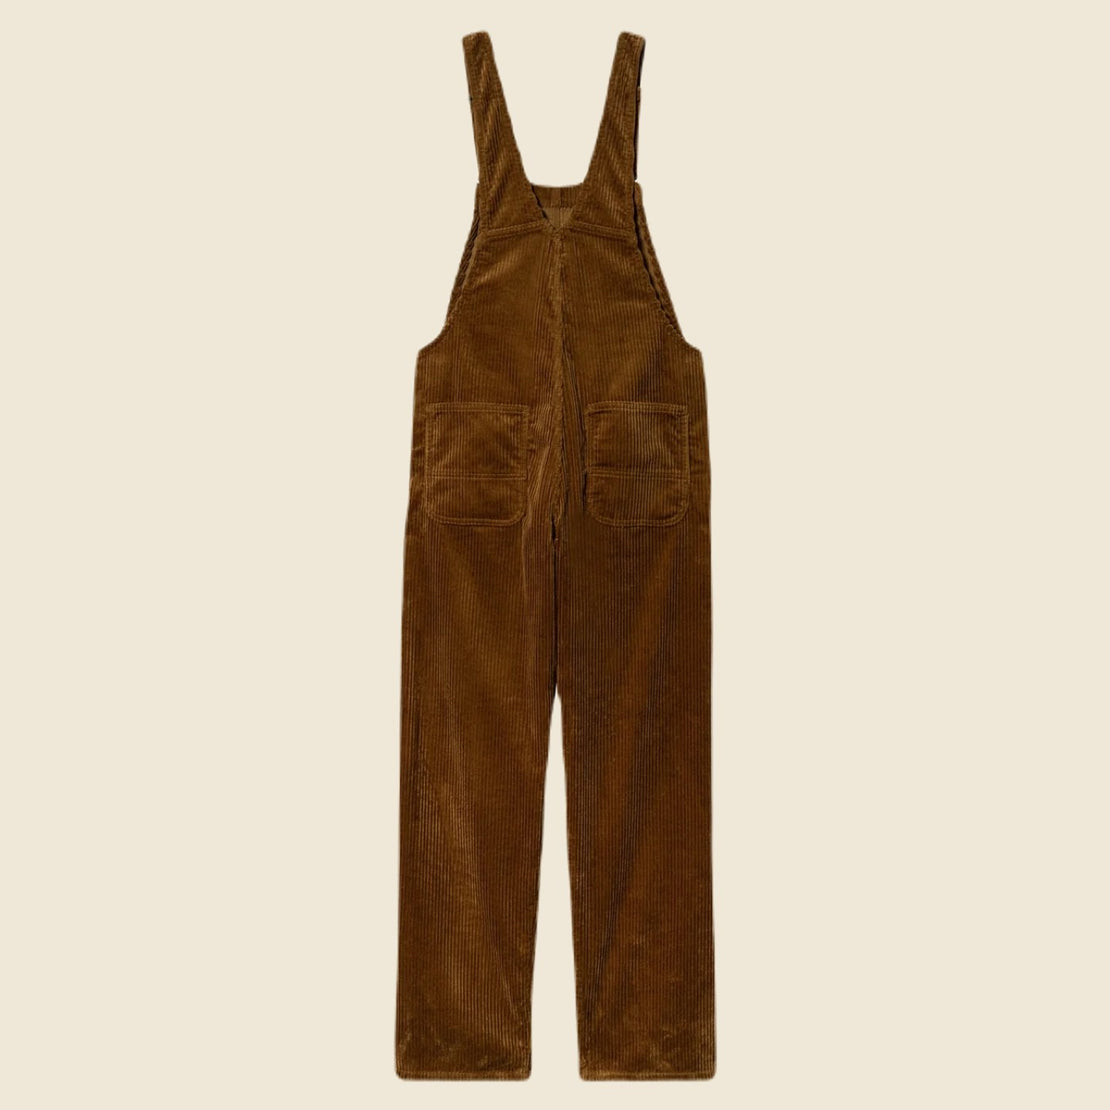 Corduory Bib Overall - Deep Hamilton Brown - Carhartt WIP - STAG Provisions - W - Onepiece - Overalls